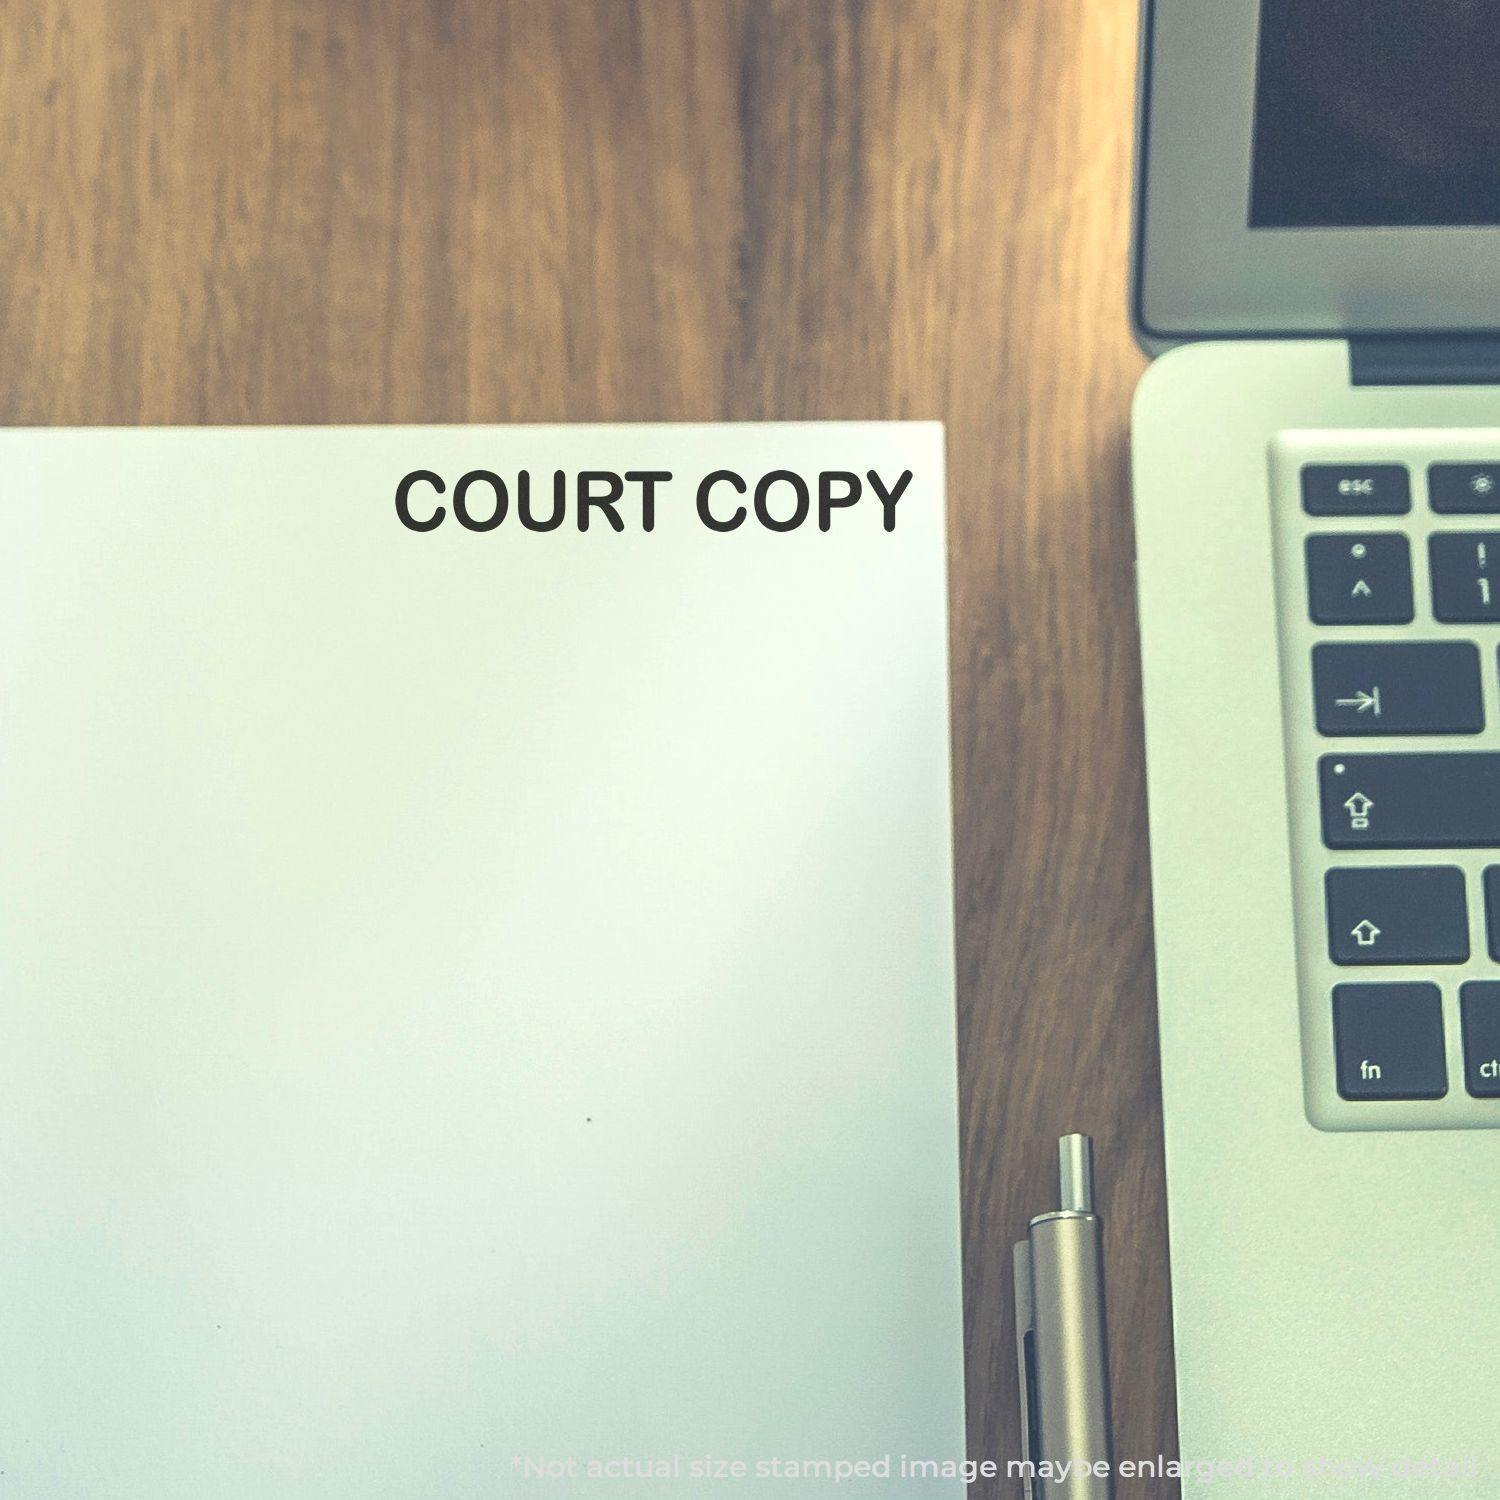 A self-inking stamp with a stamped image showing how the text "COURT COPY" is displayed after stamping.